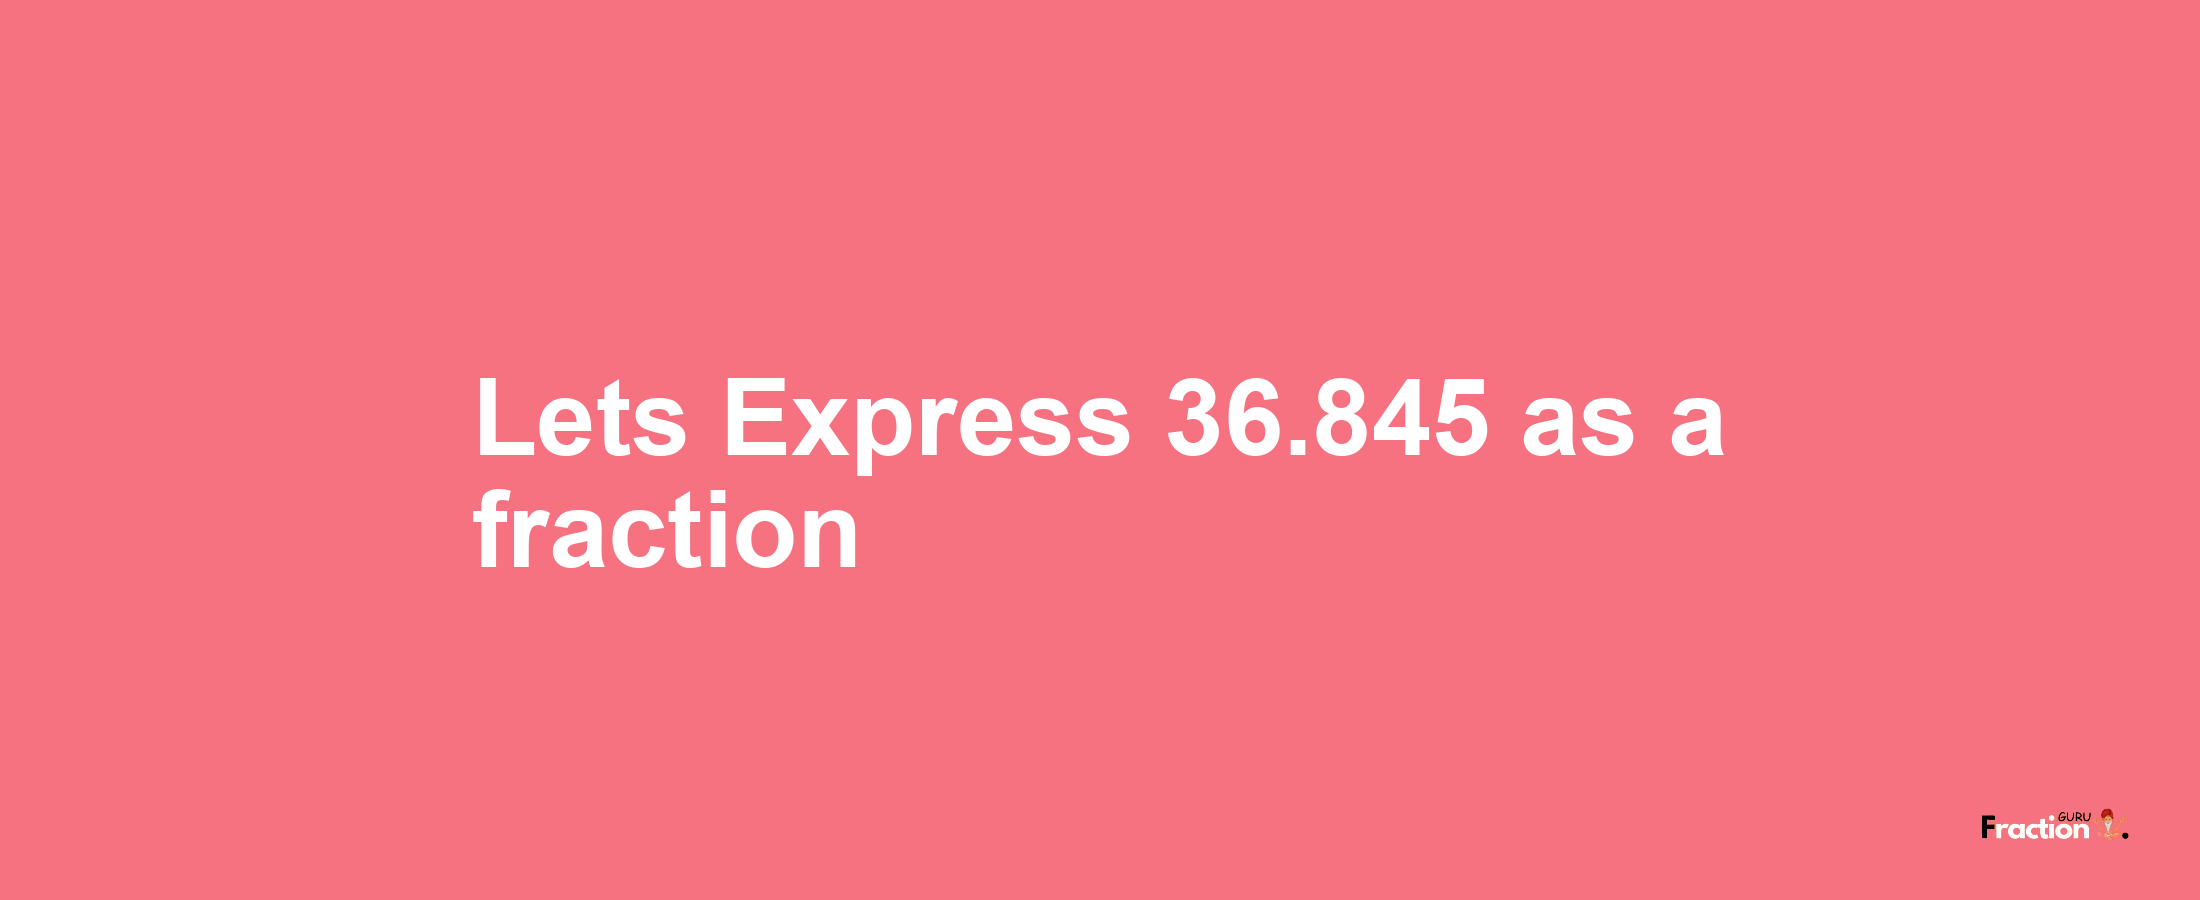 Lets Express 36.845 as afraction